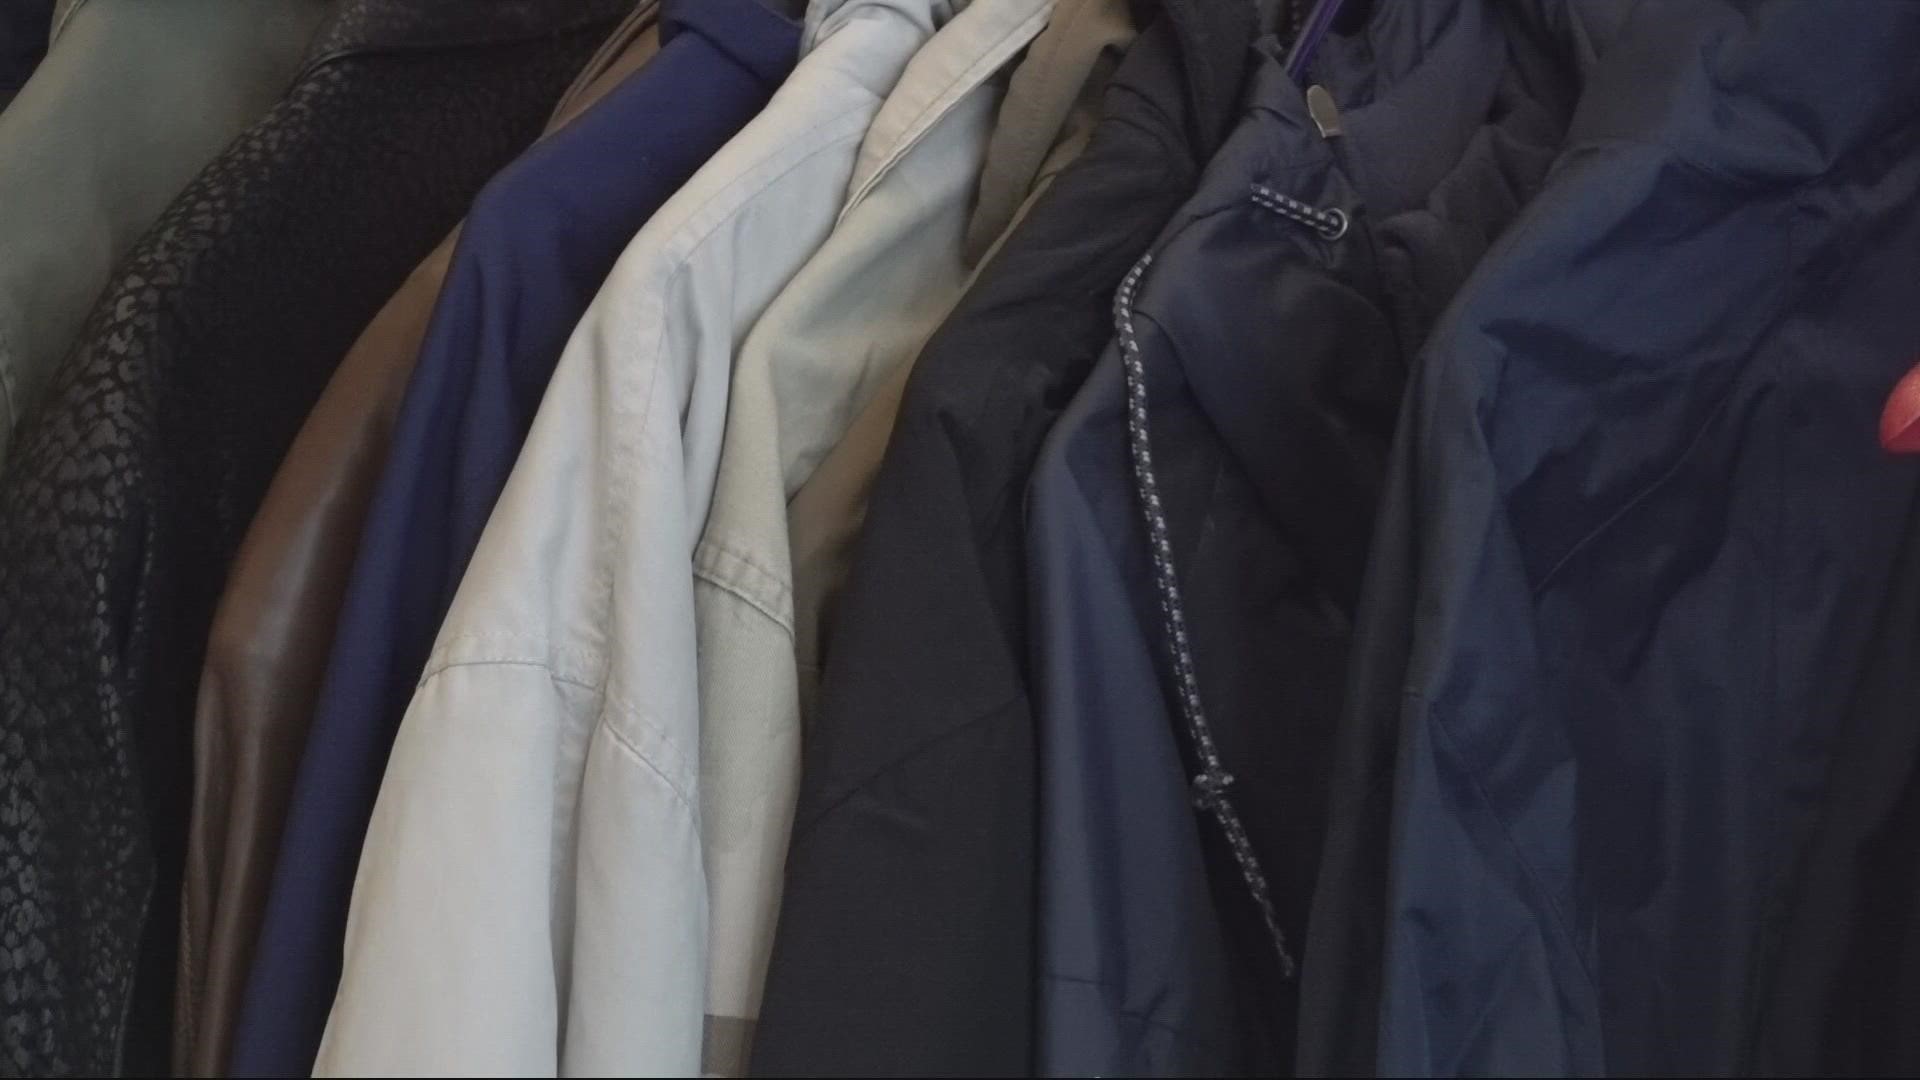 Homeless and low-income people in Portland are in need of winter jackets and socks. They’re distributed by places like Blanchet House and Rose Haven.